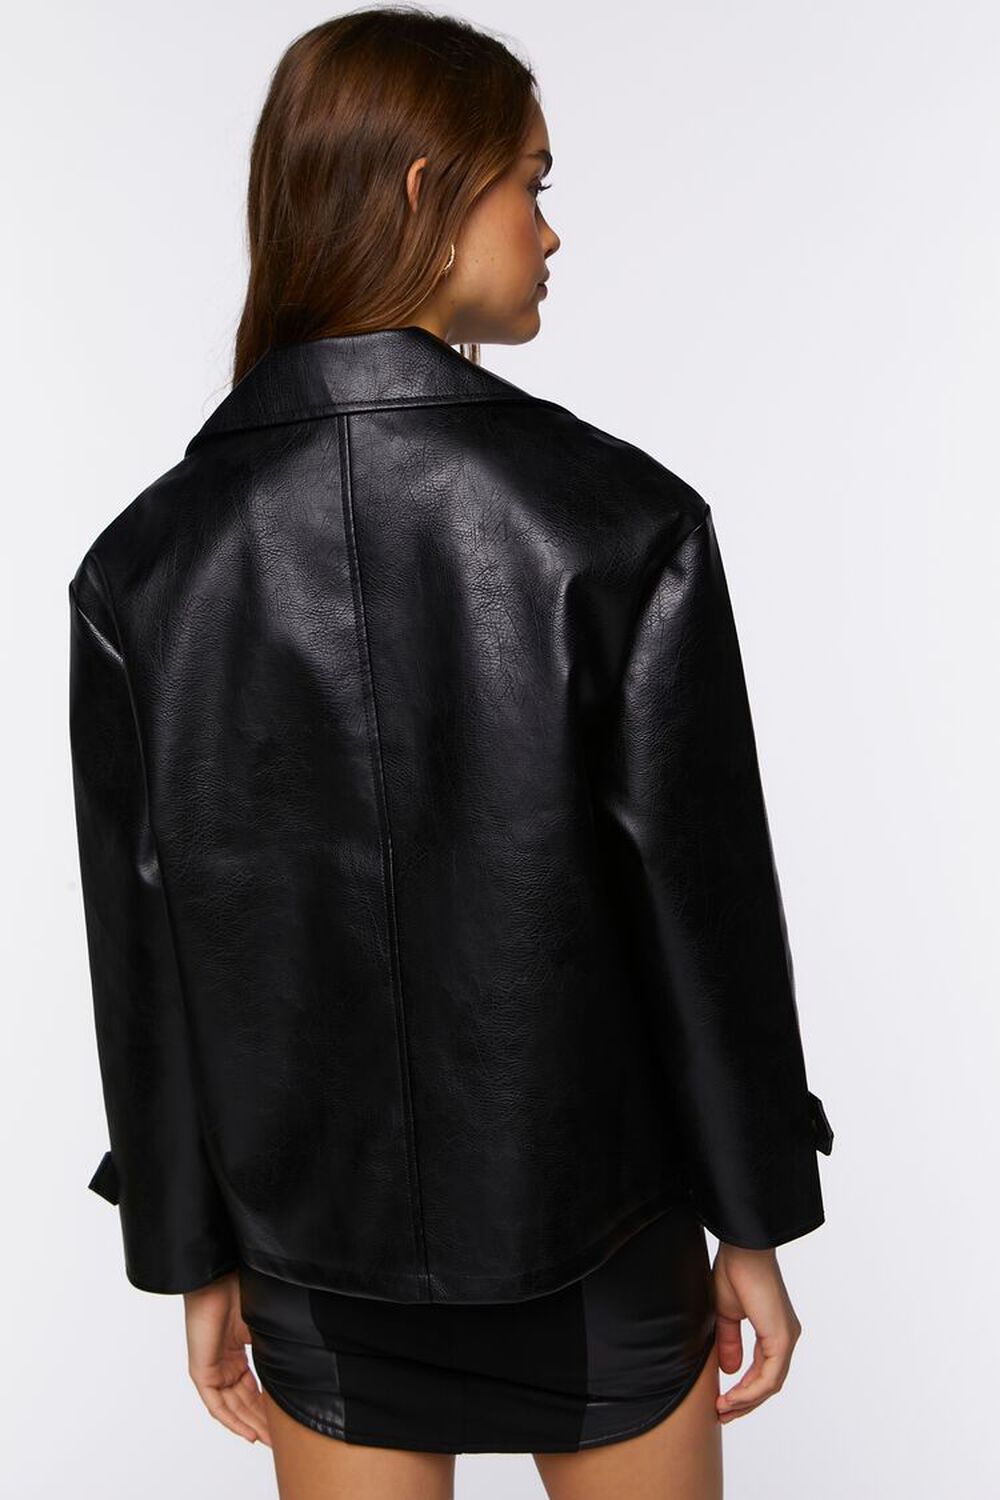 BLACK Faux Leather Double-Breasted Jacket, image 3